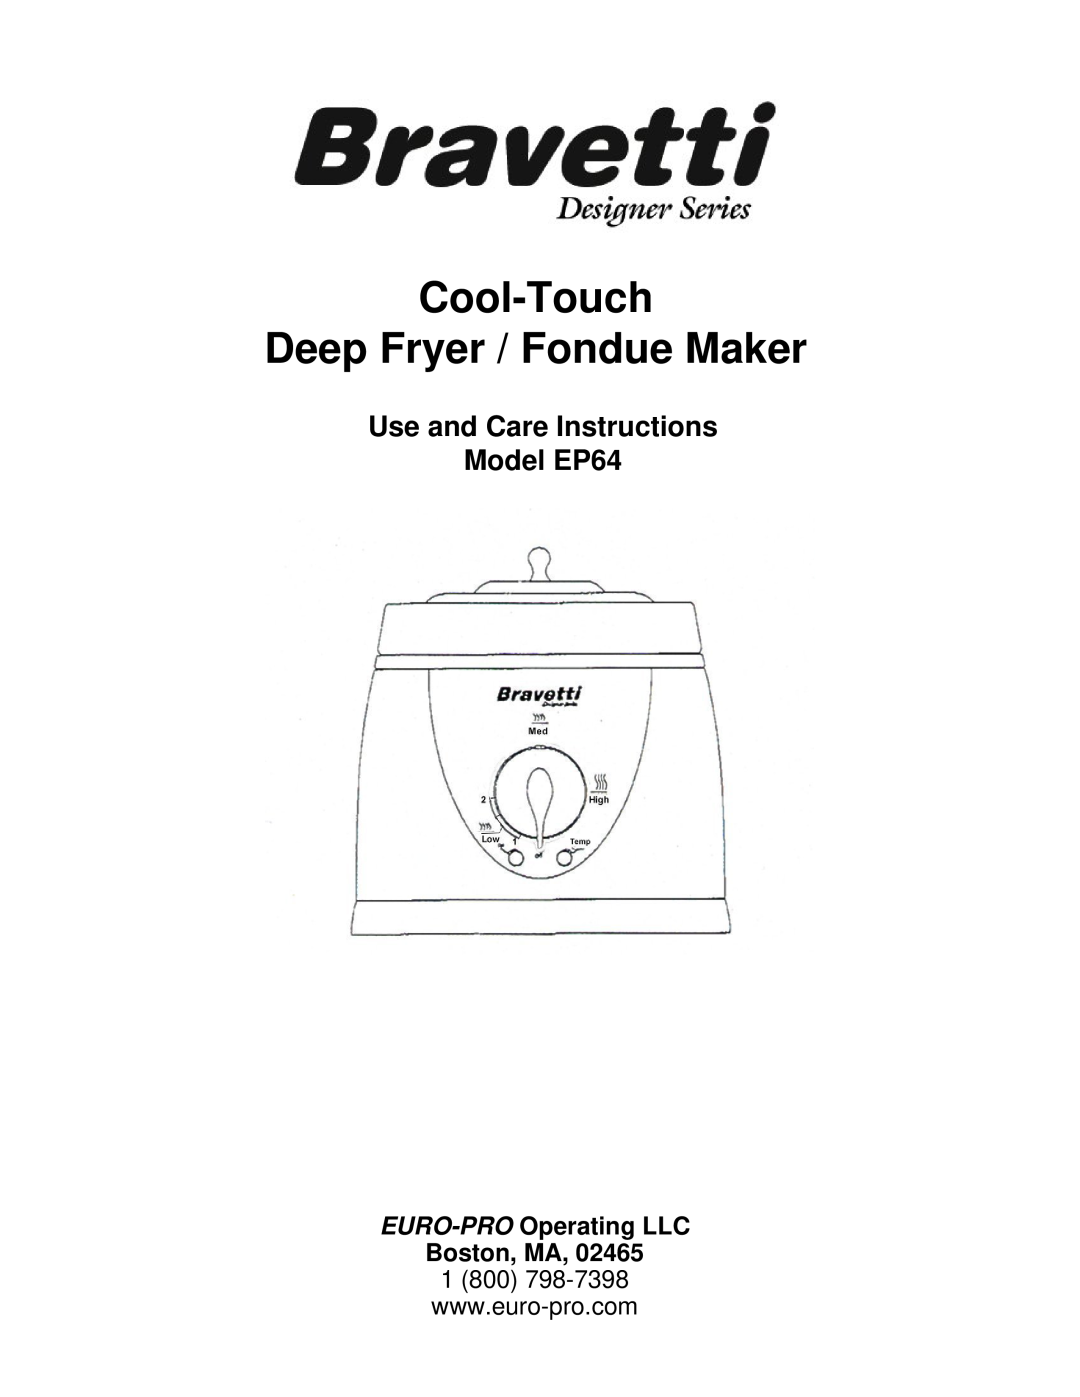 Bravetti manual Cool-Touch Deep Fryer / Fondue Maker, Use and Care Instructions Model EP64 